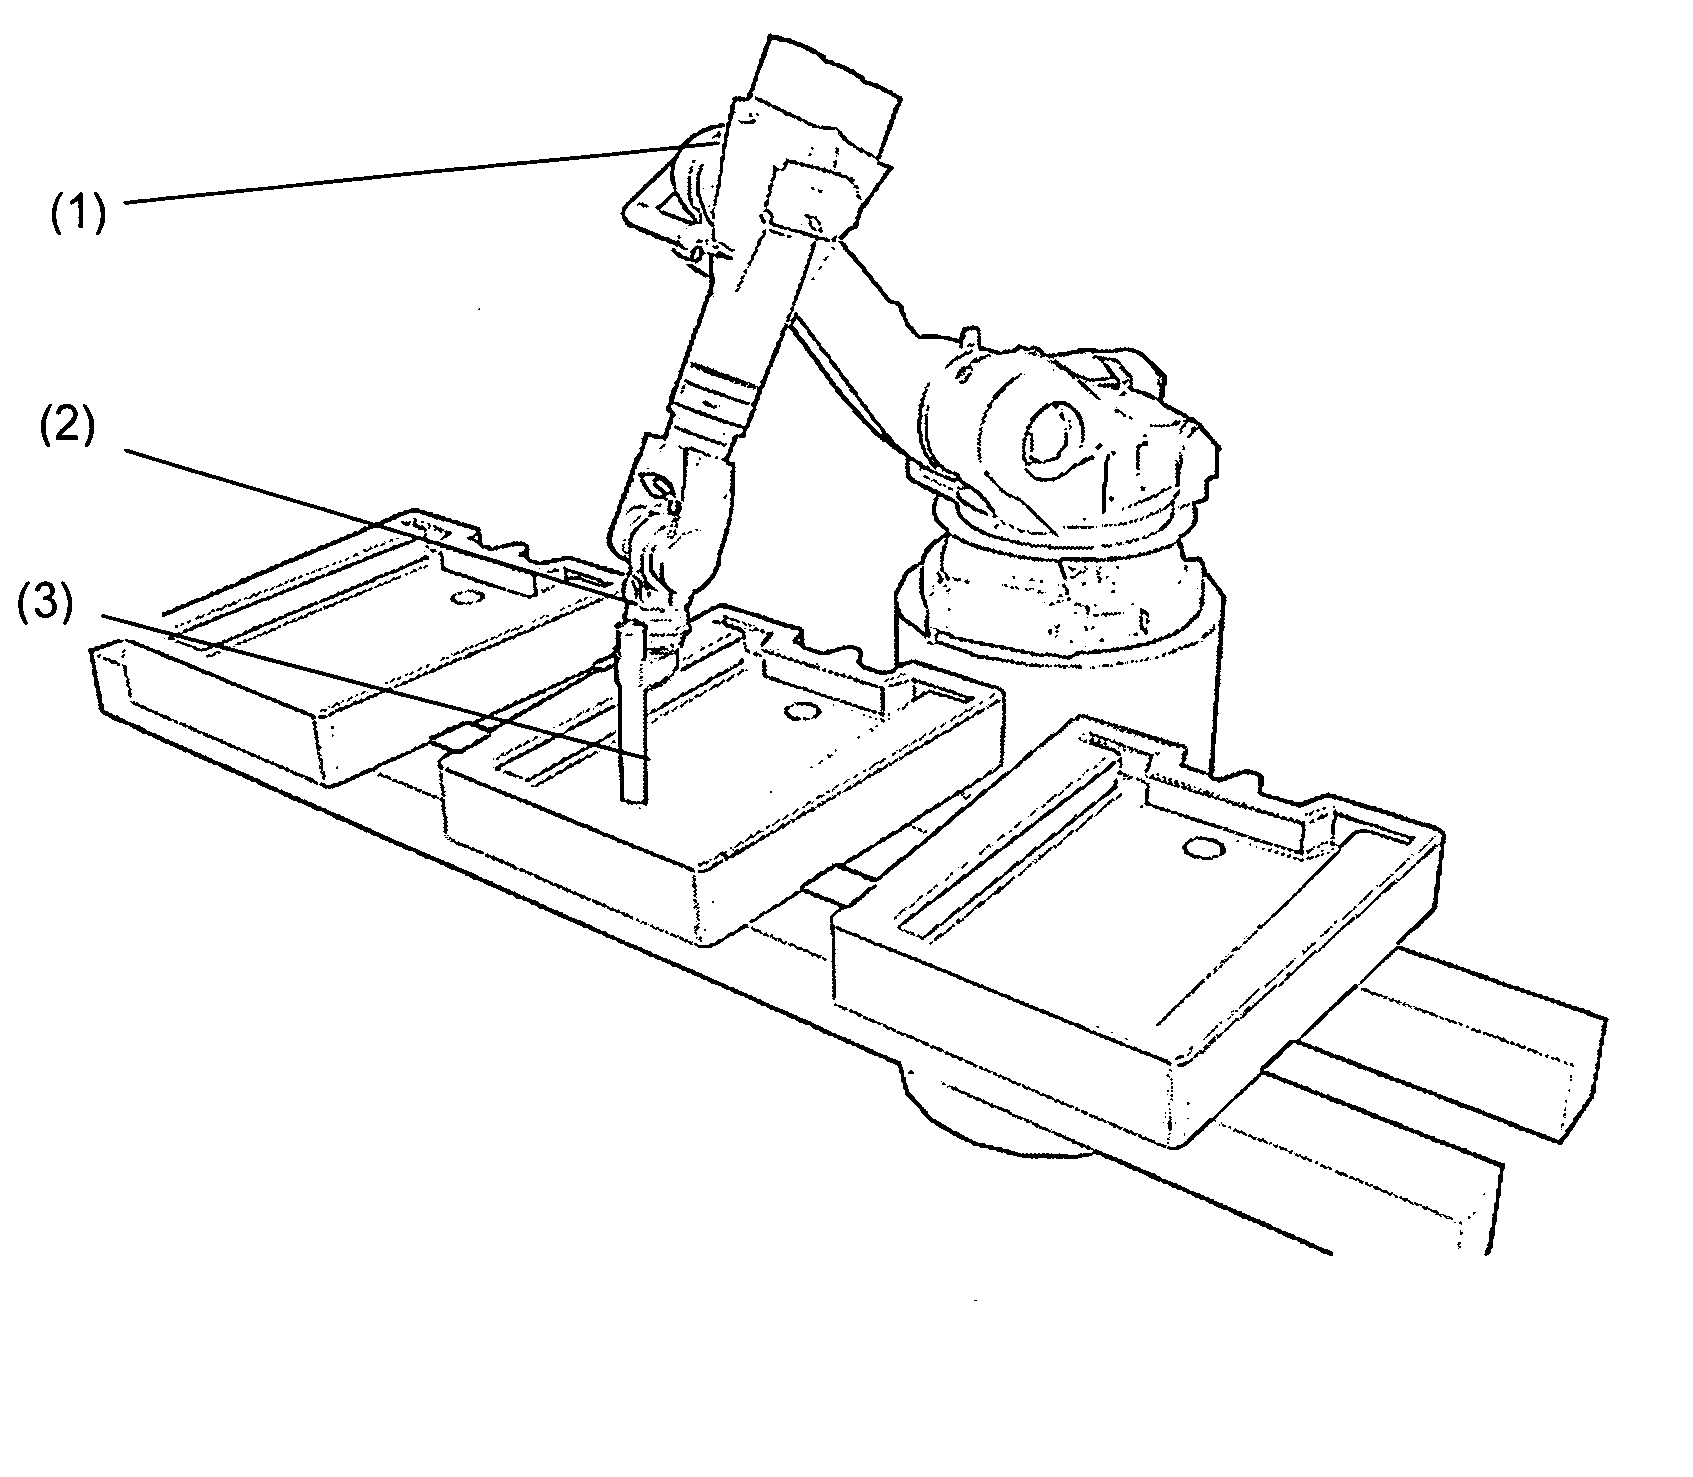 Robot system and method for inspecting and repairing casts in smelting processes